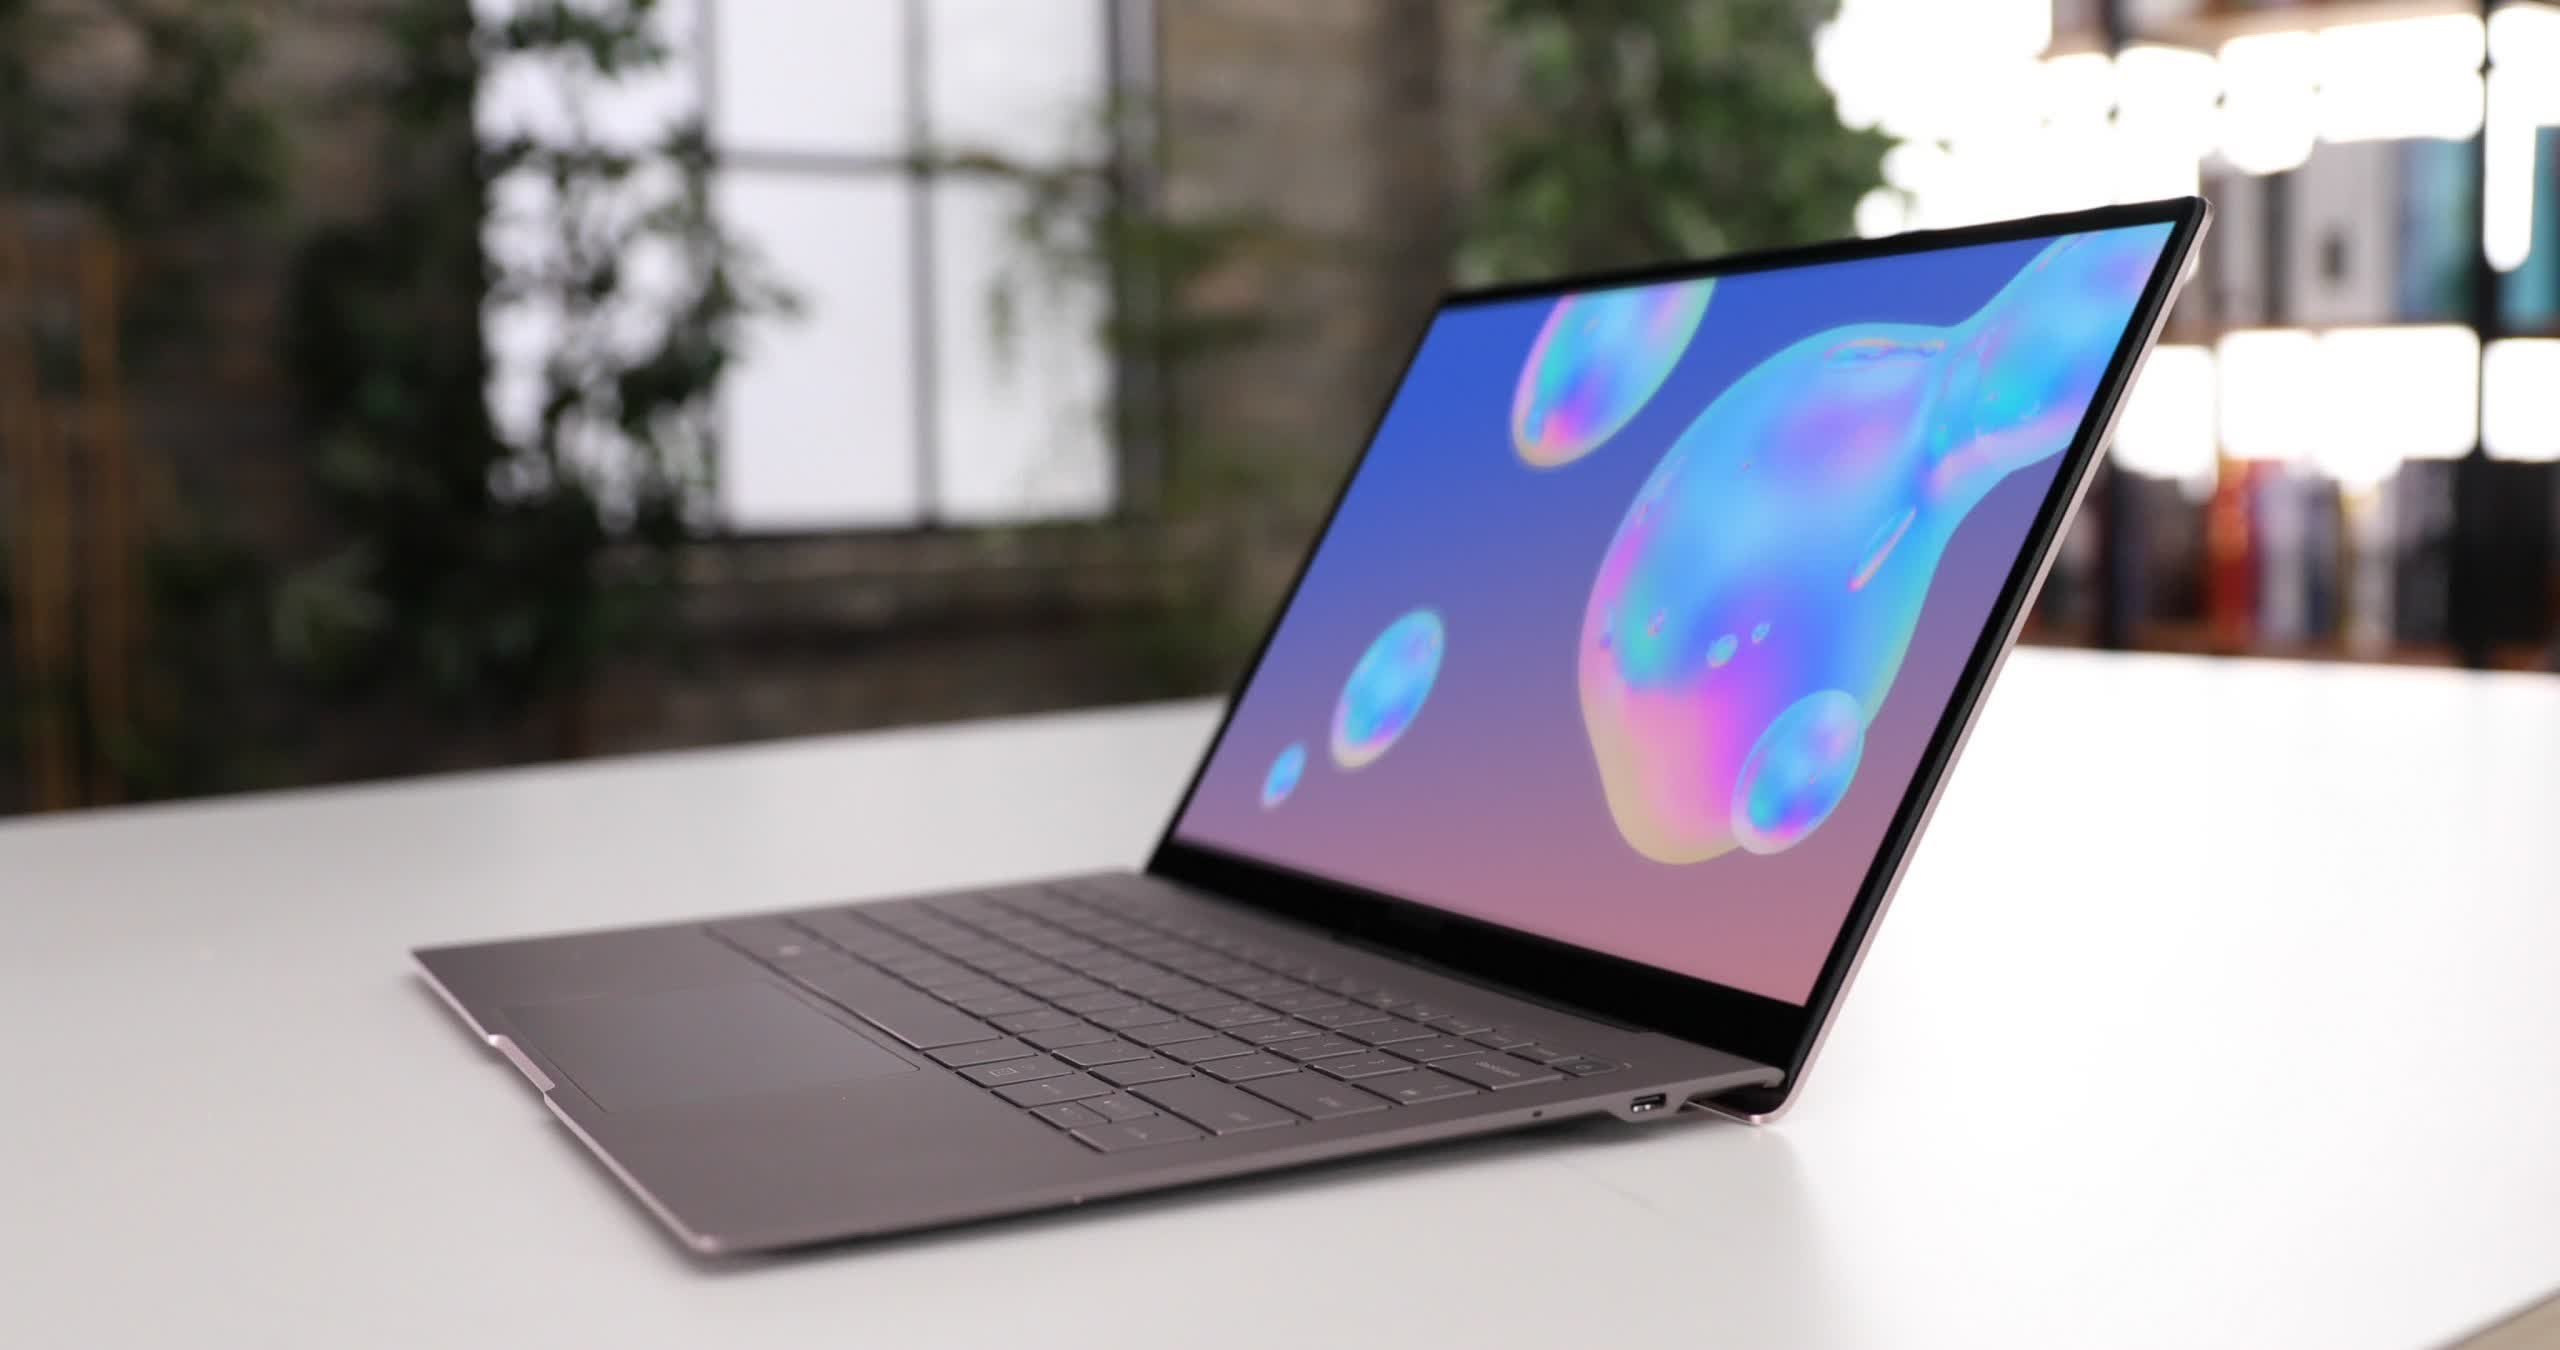 Upcoming Samsung Galaxy Book laptops will come with 120Hz OLED displays